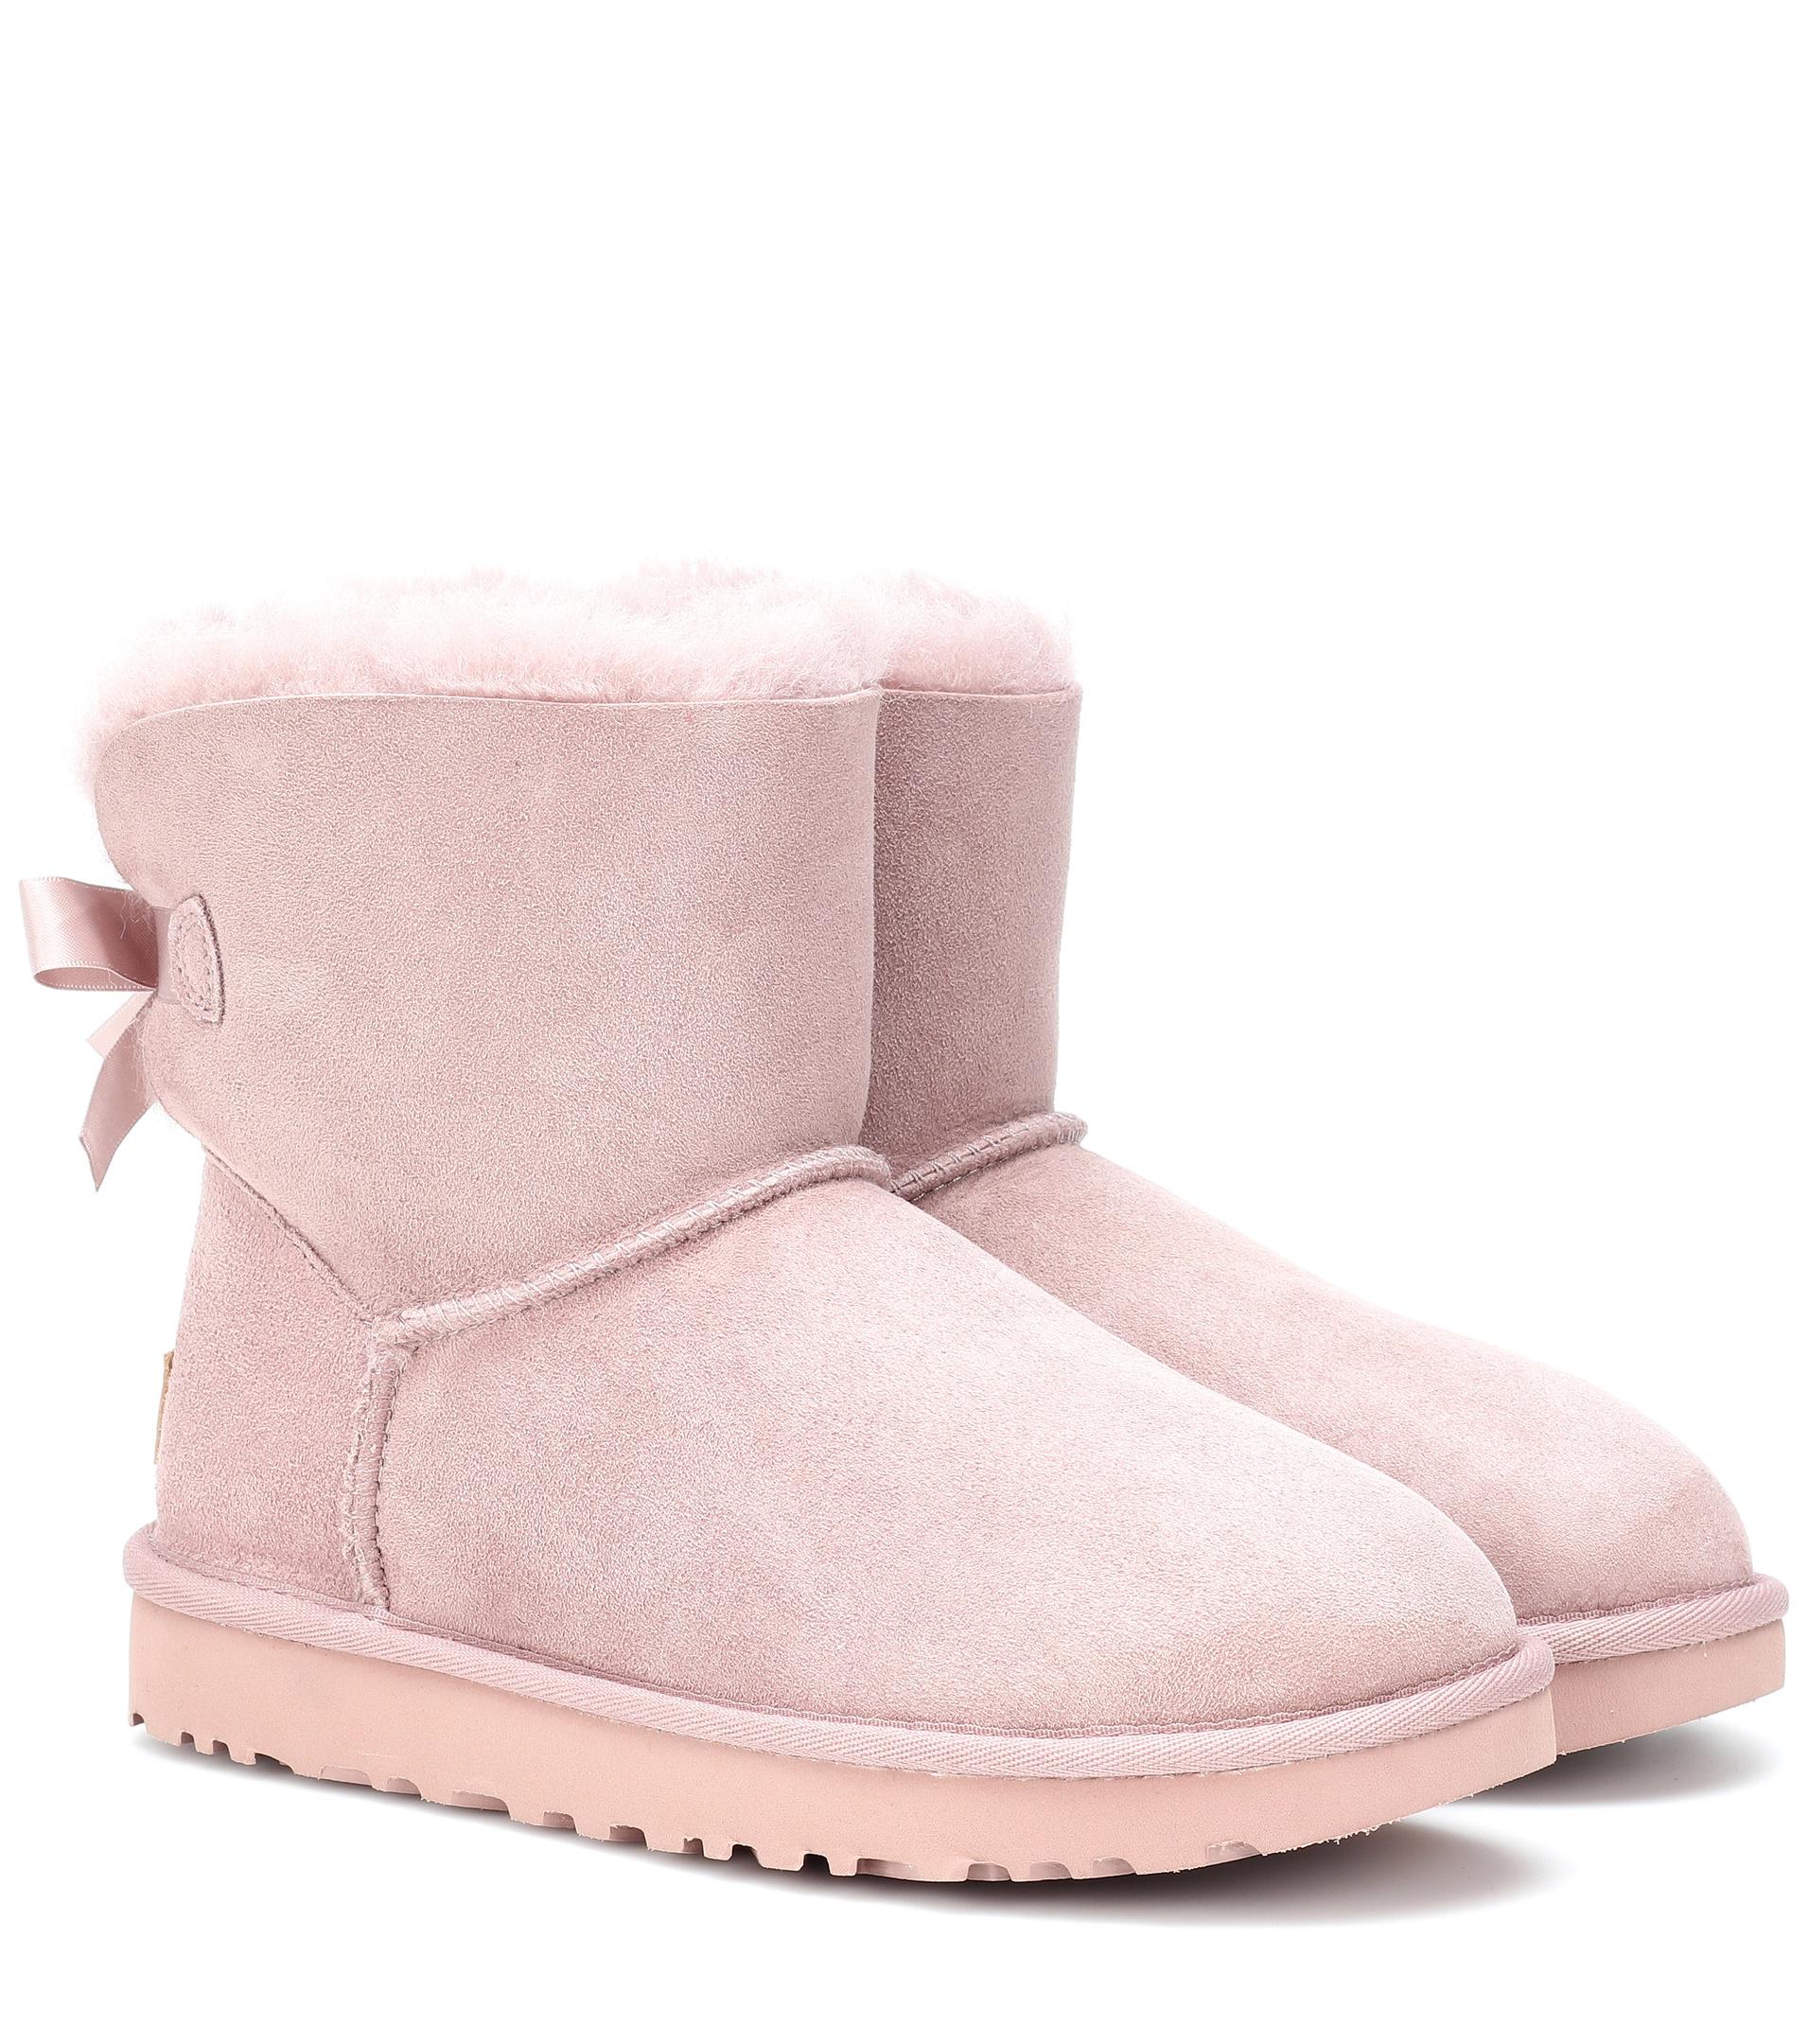 UGG Mini Bailey Bow Ii Suede Boots in Pink - Lyst